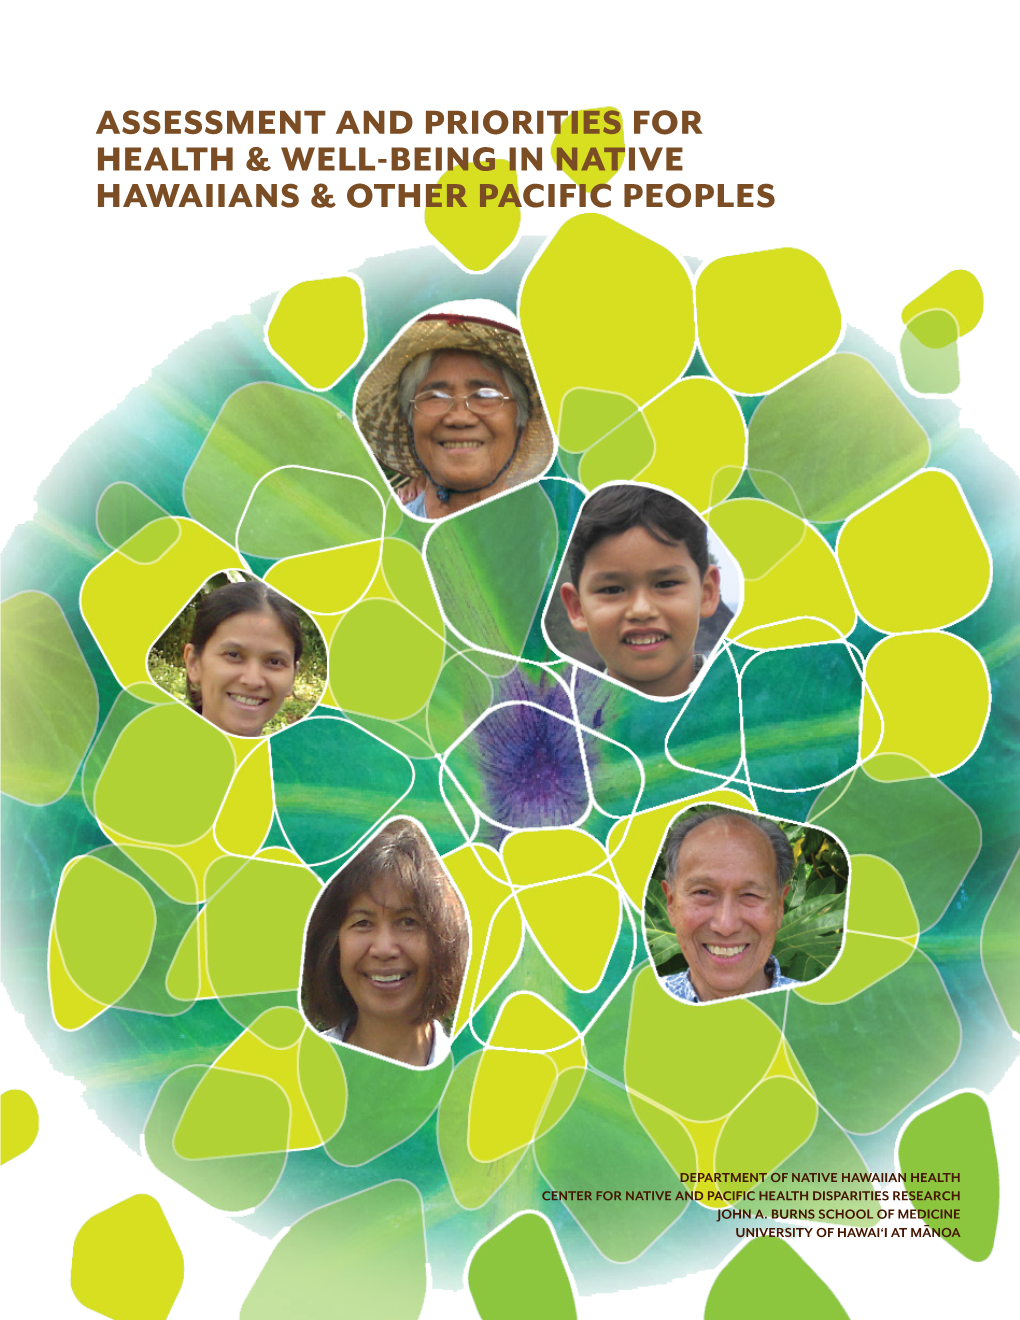 Assessment & Priorities for Health & Well-Being in Native